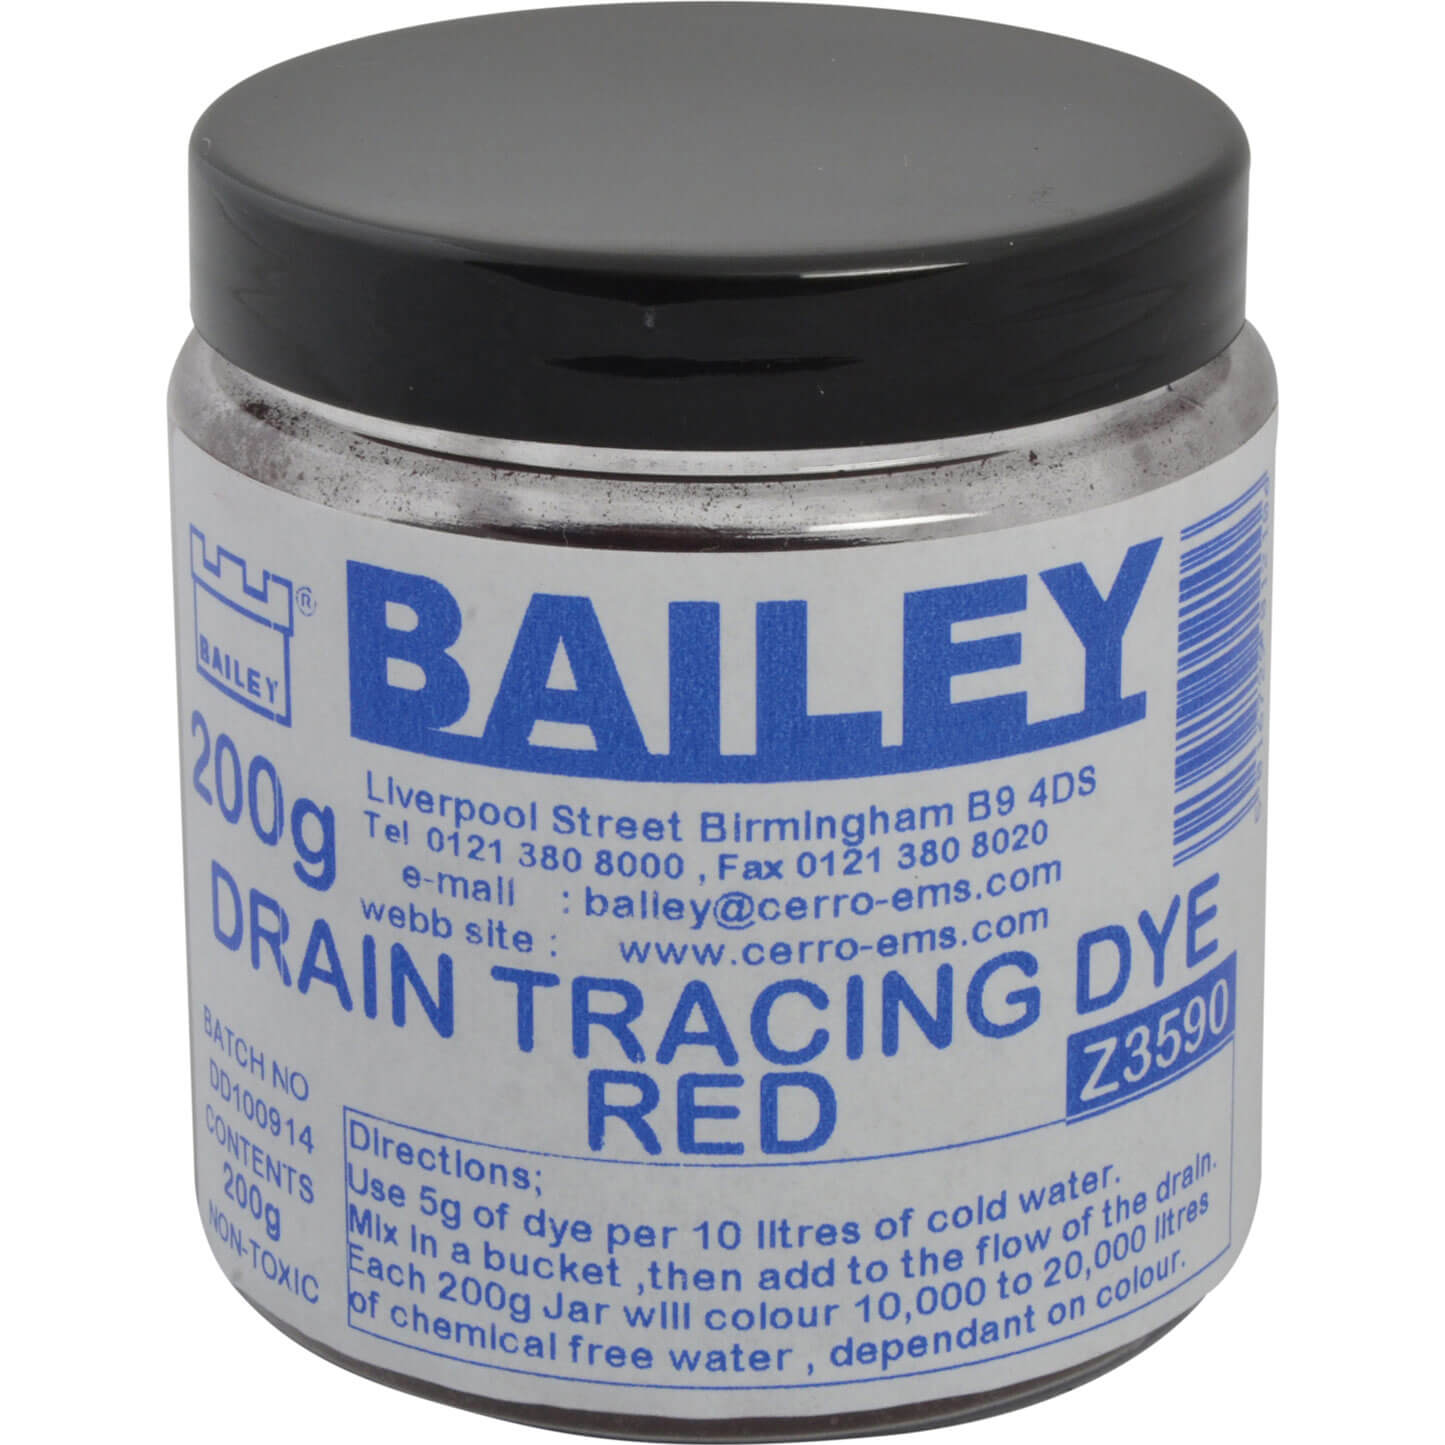 Image of Bailey Drain Tracing Dye Red 200g